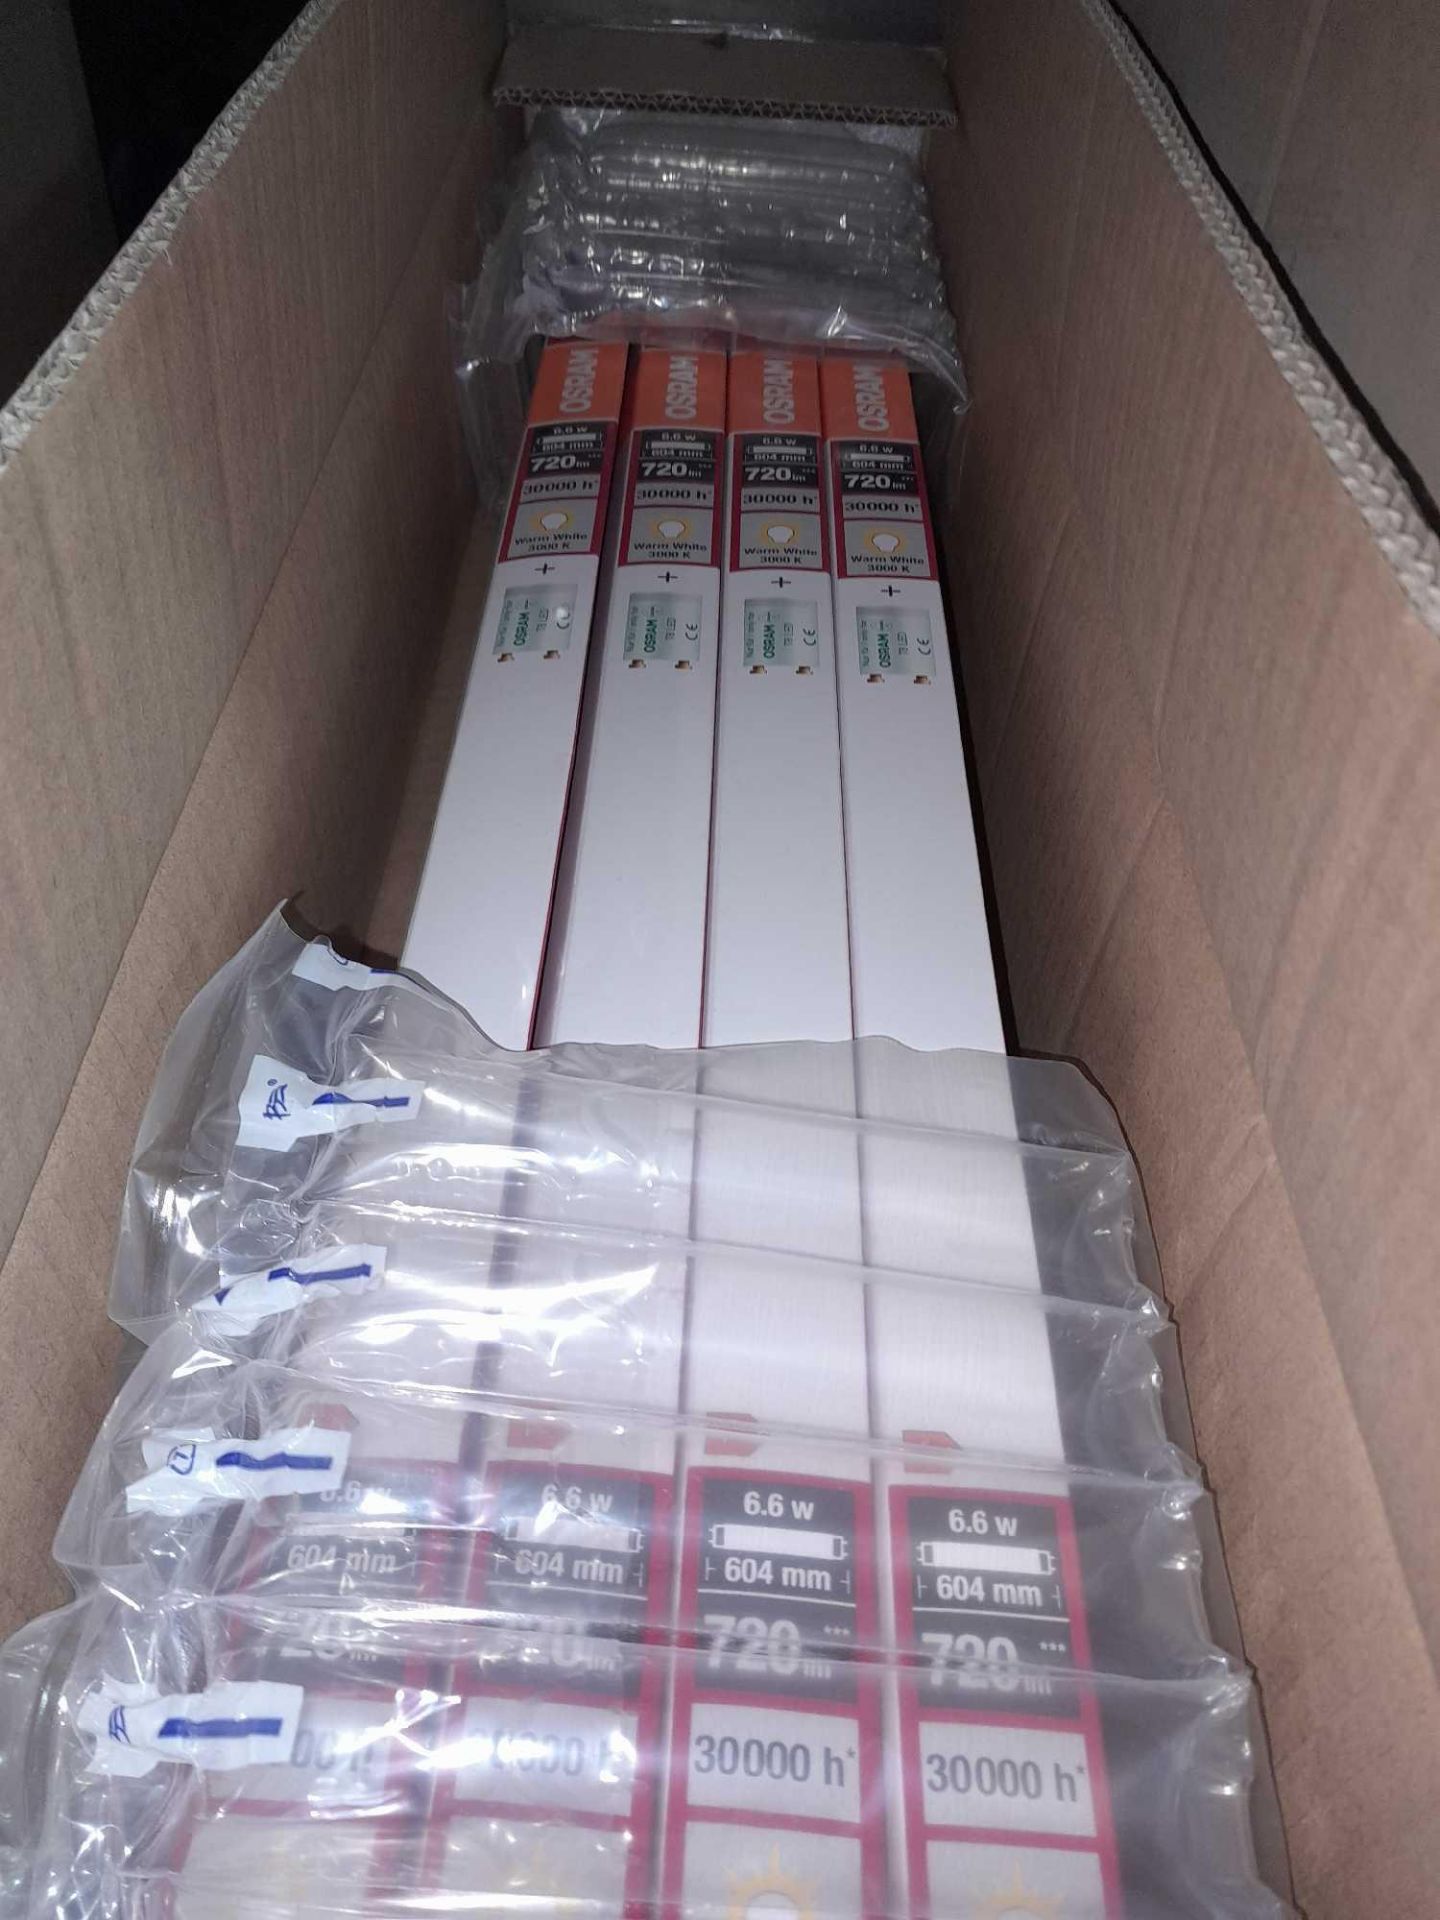 RRP £280 Lot To Contain 7 Boxes Of Orasm Ledtube T8 Em Sp 600 In Warm White 8 In Each Box - Image 6 of 6